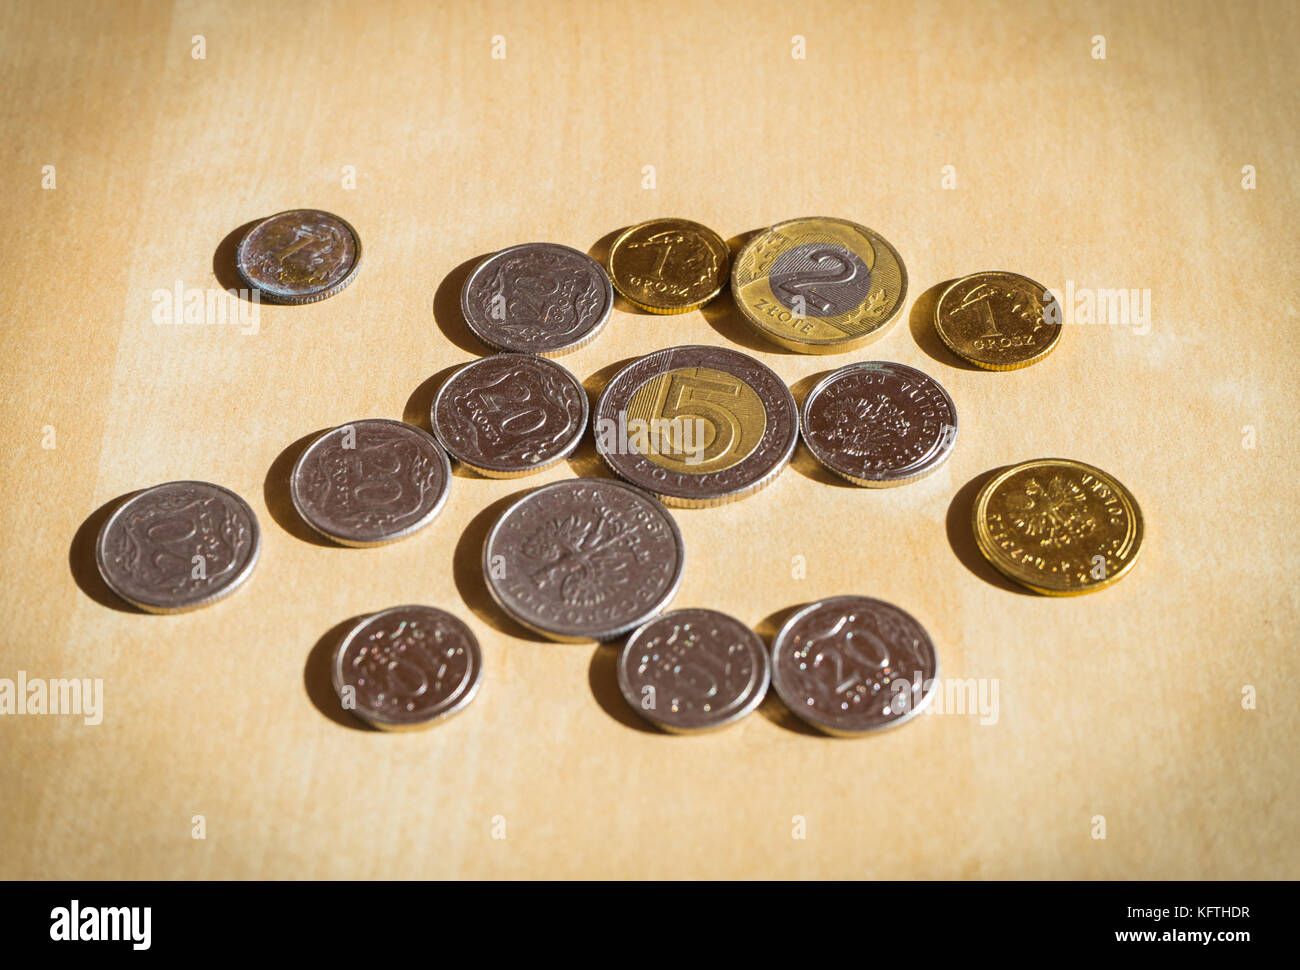 Polish currency coins of zlotys and groszy Stock Photo